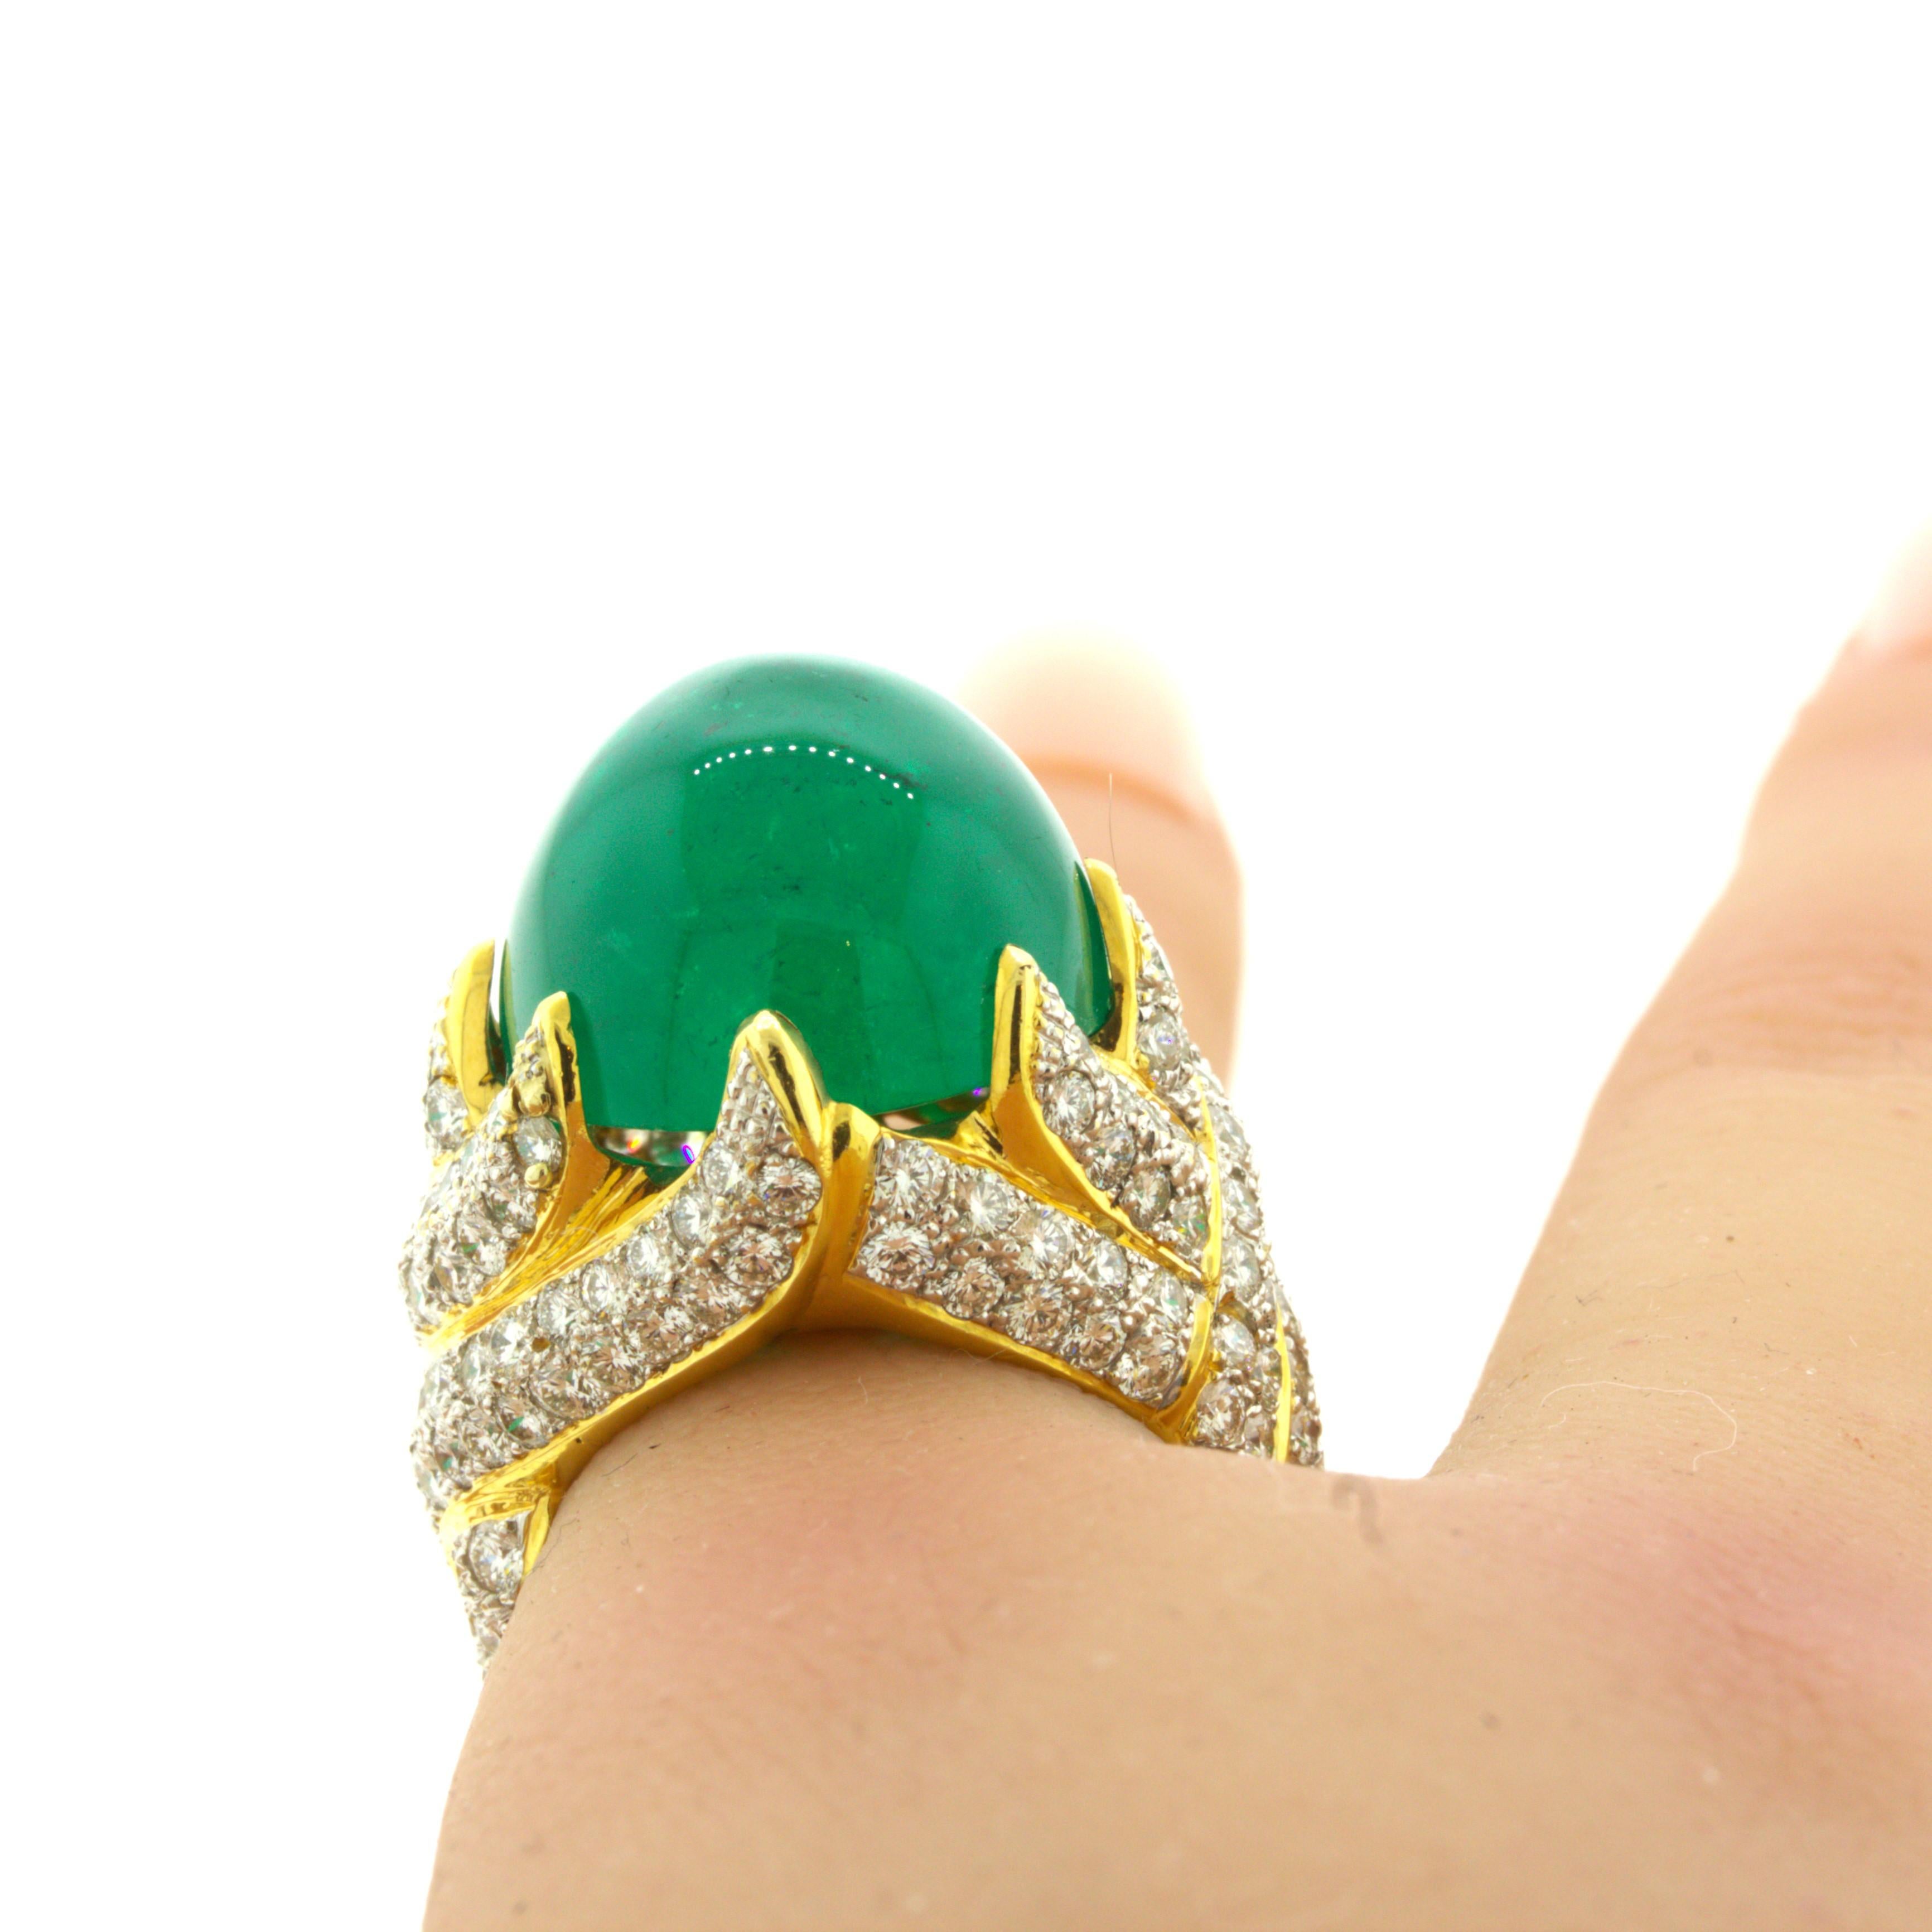 26.67 Carat Colombian Emerald Diamond 18K Yellow Gold Cocktail Ring, AGL Cert. For Sale 4